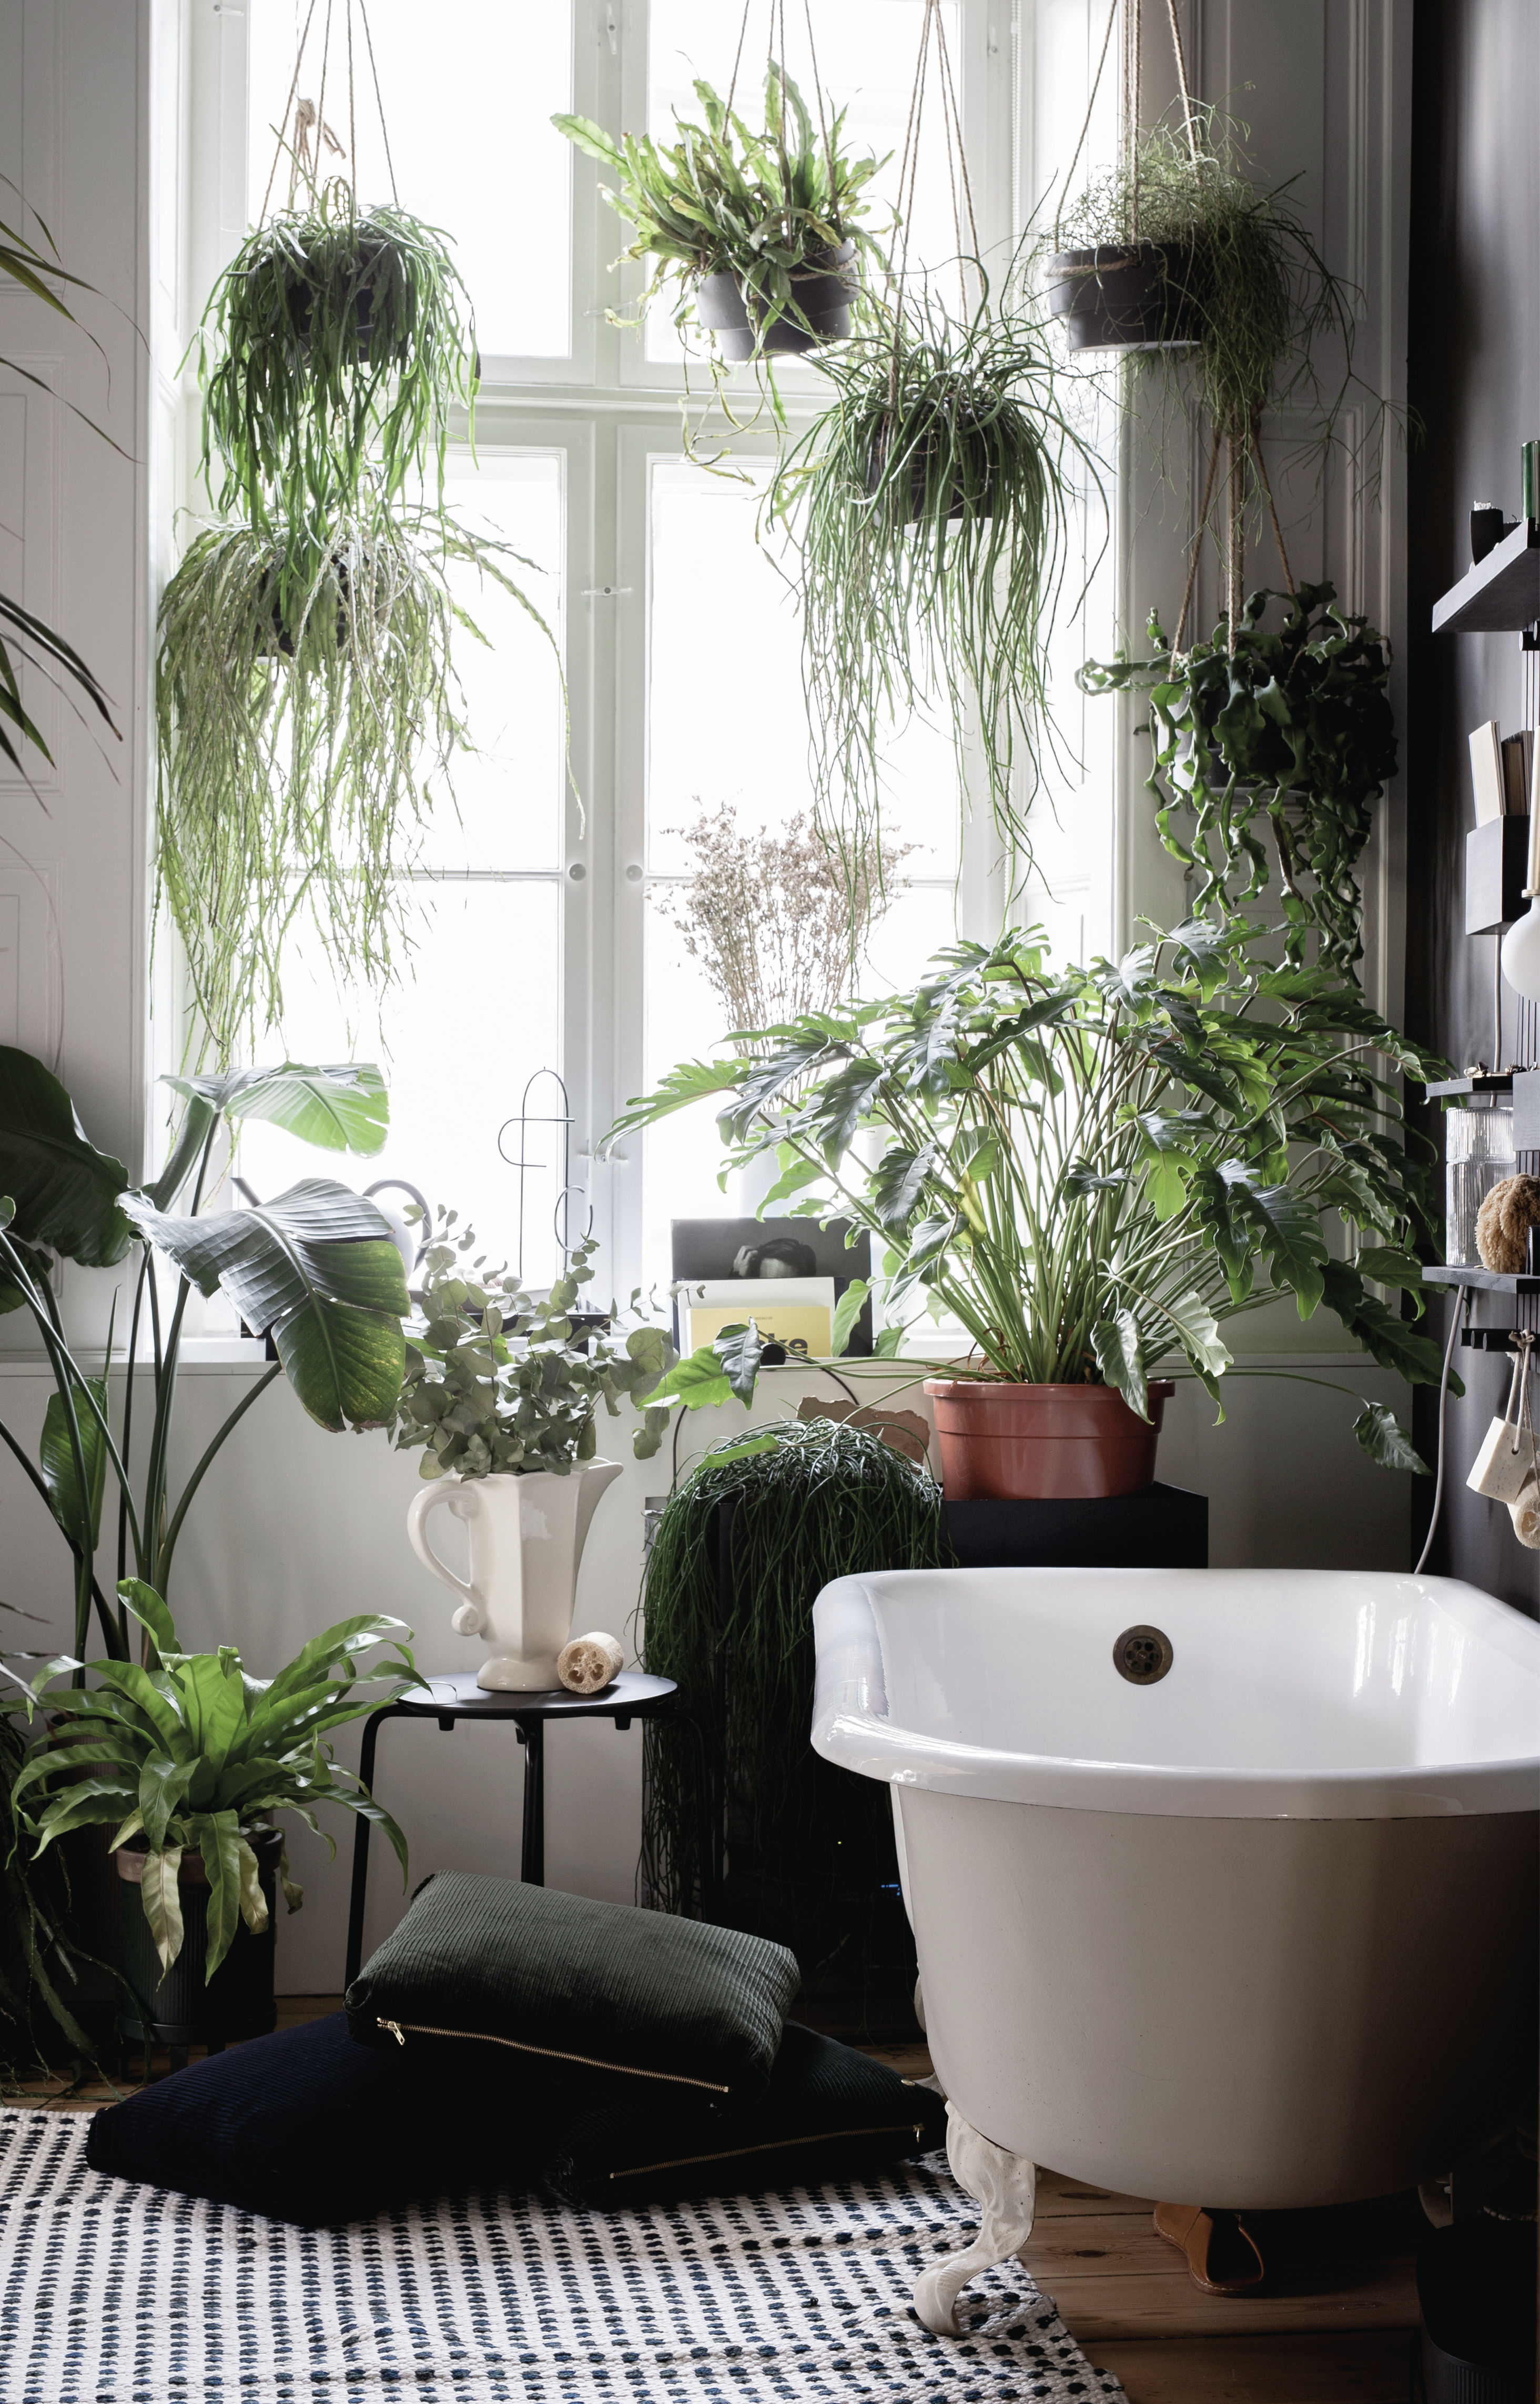 Bathroom filled with houseplants